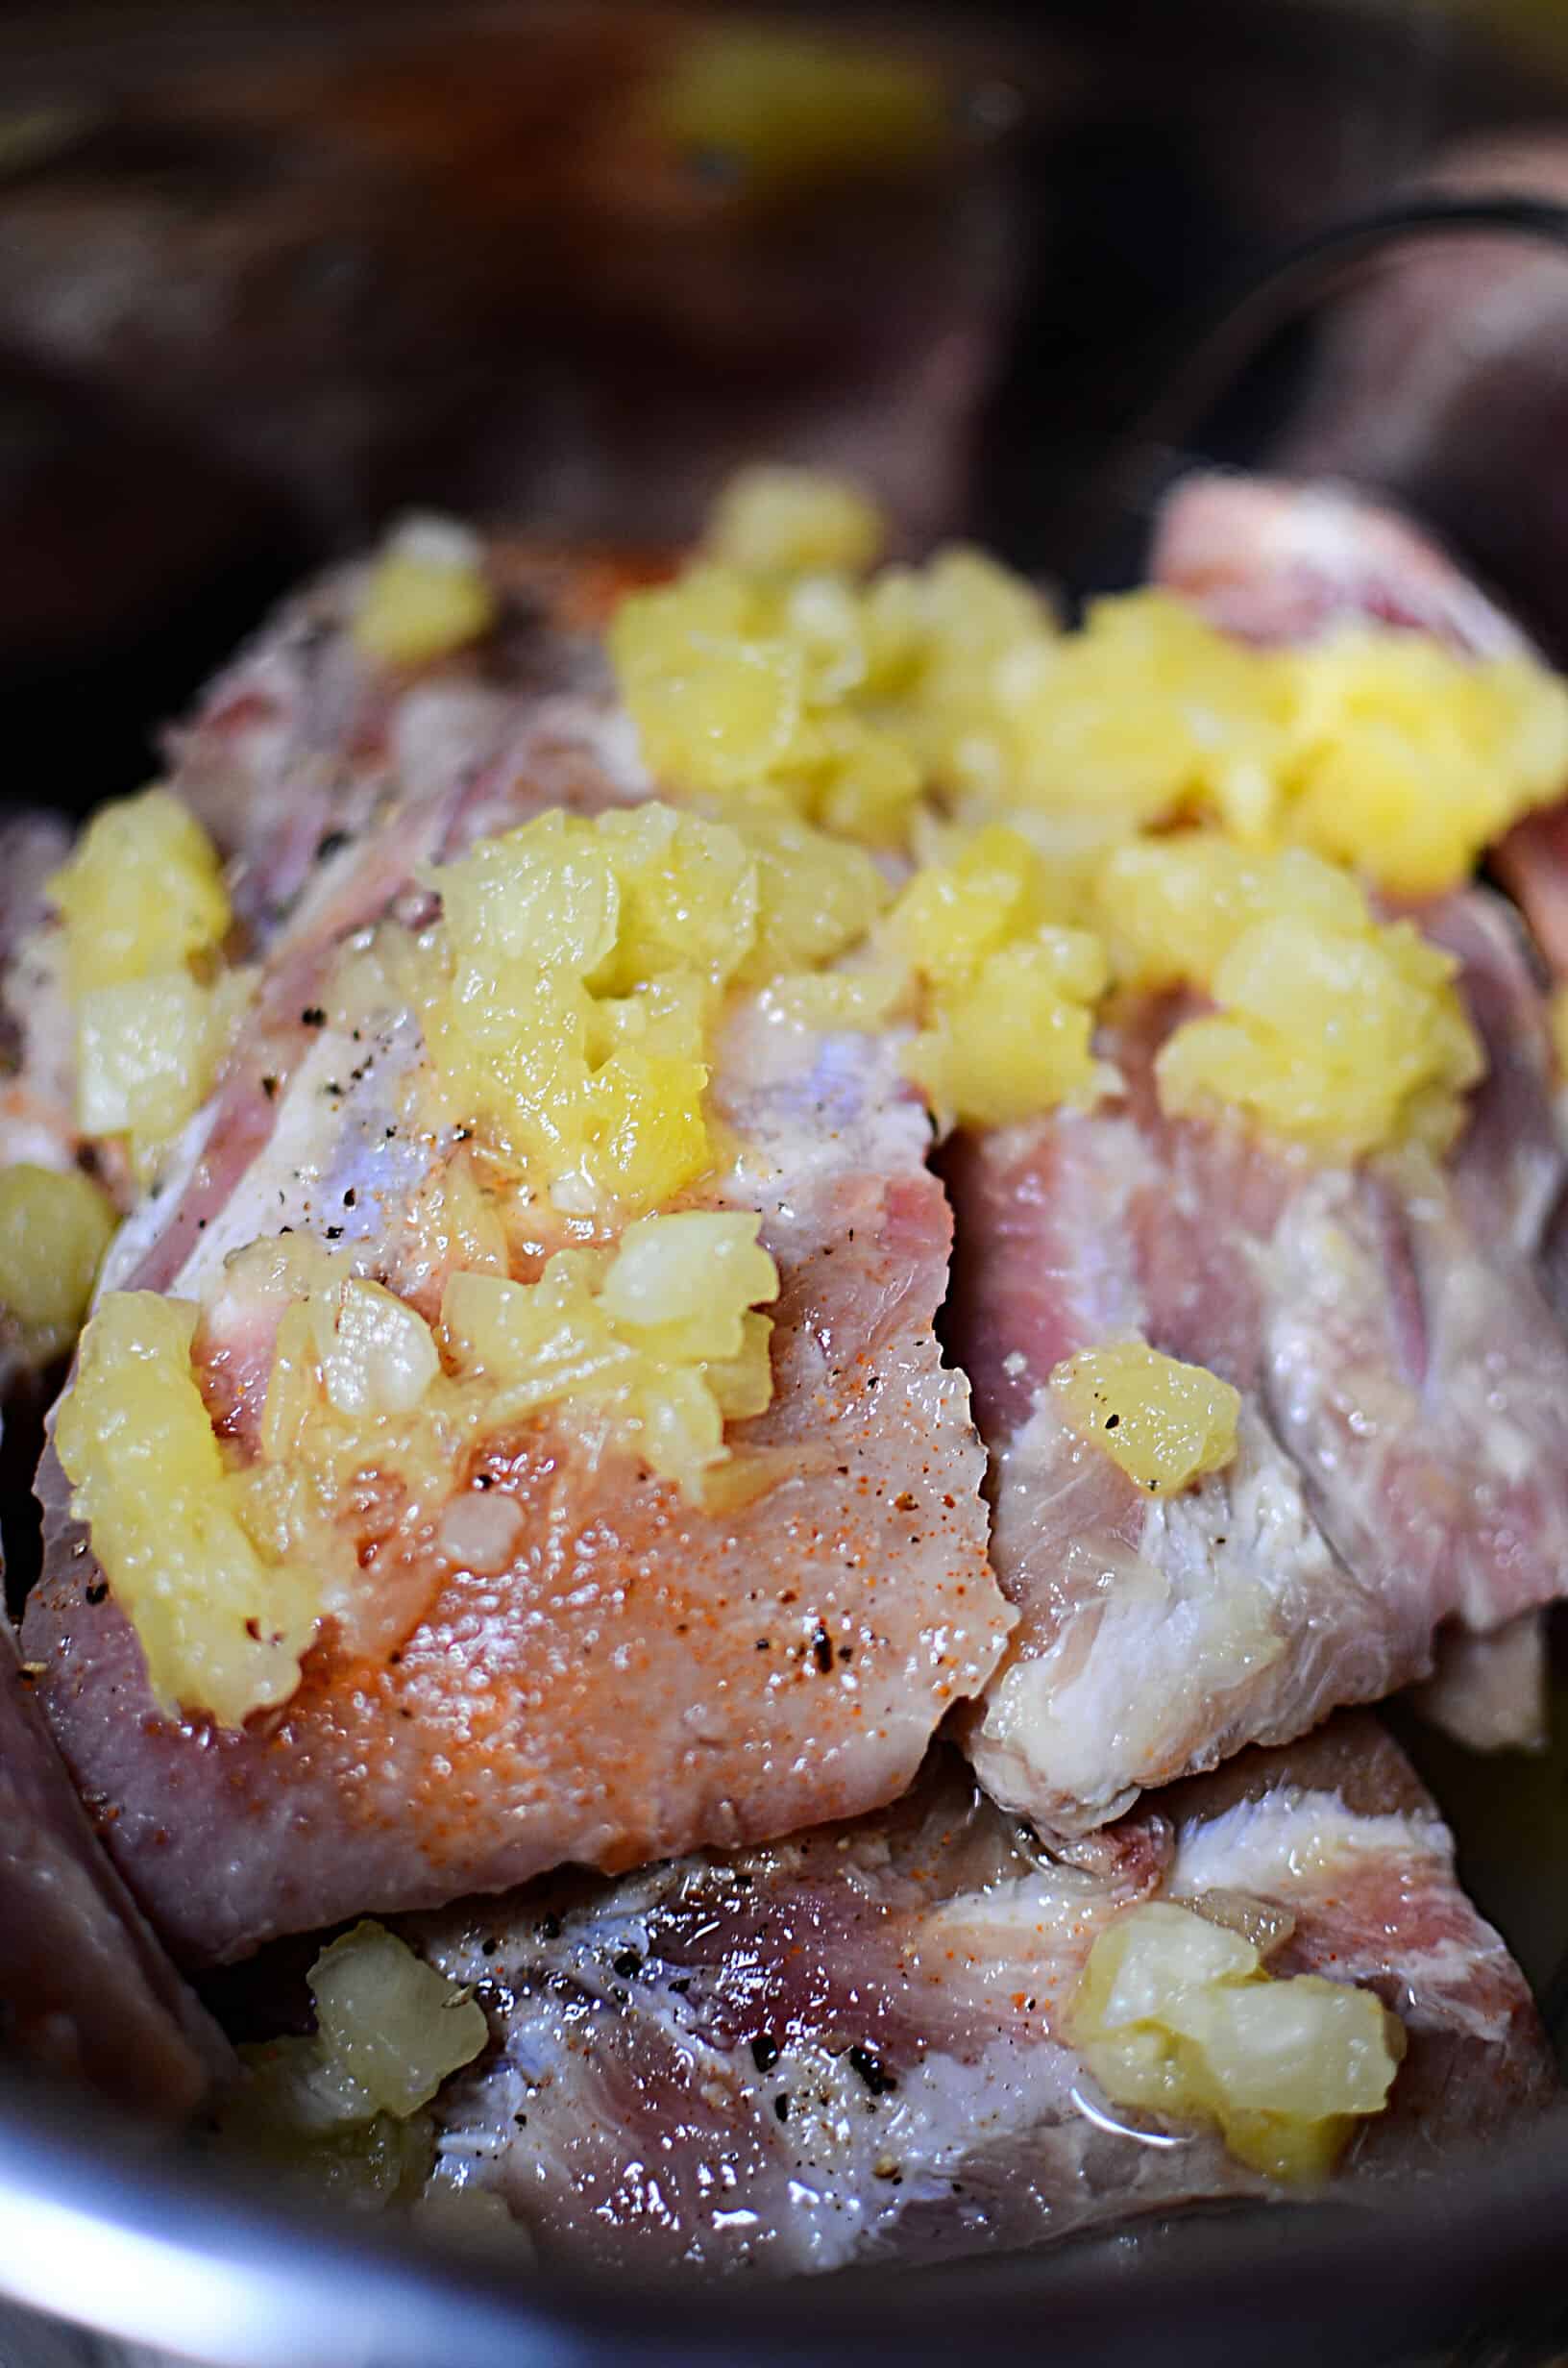 Pineapple on top of the uncooked ribs.